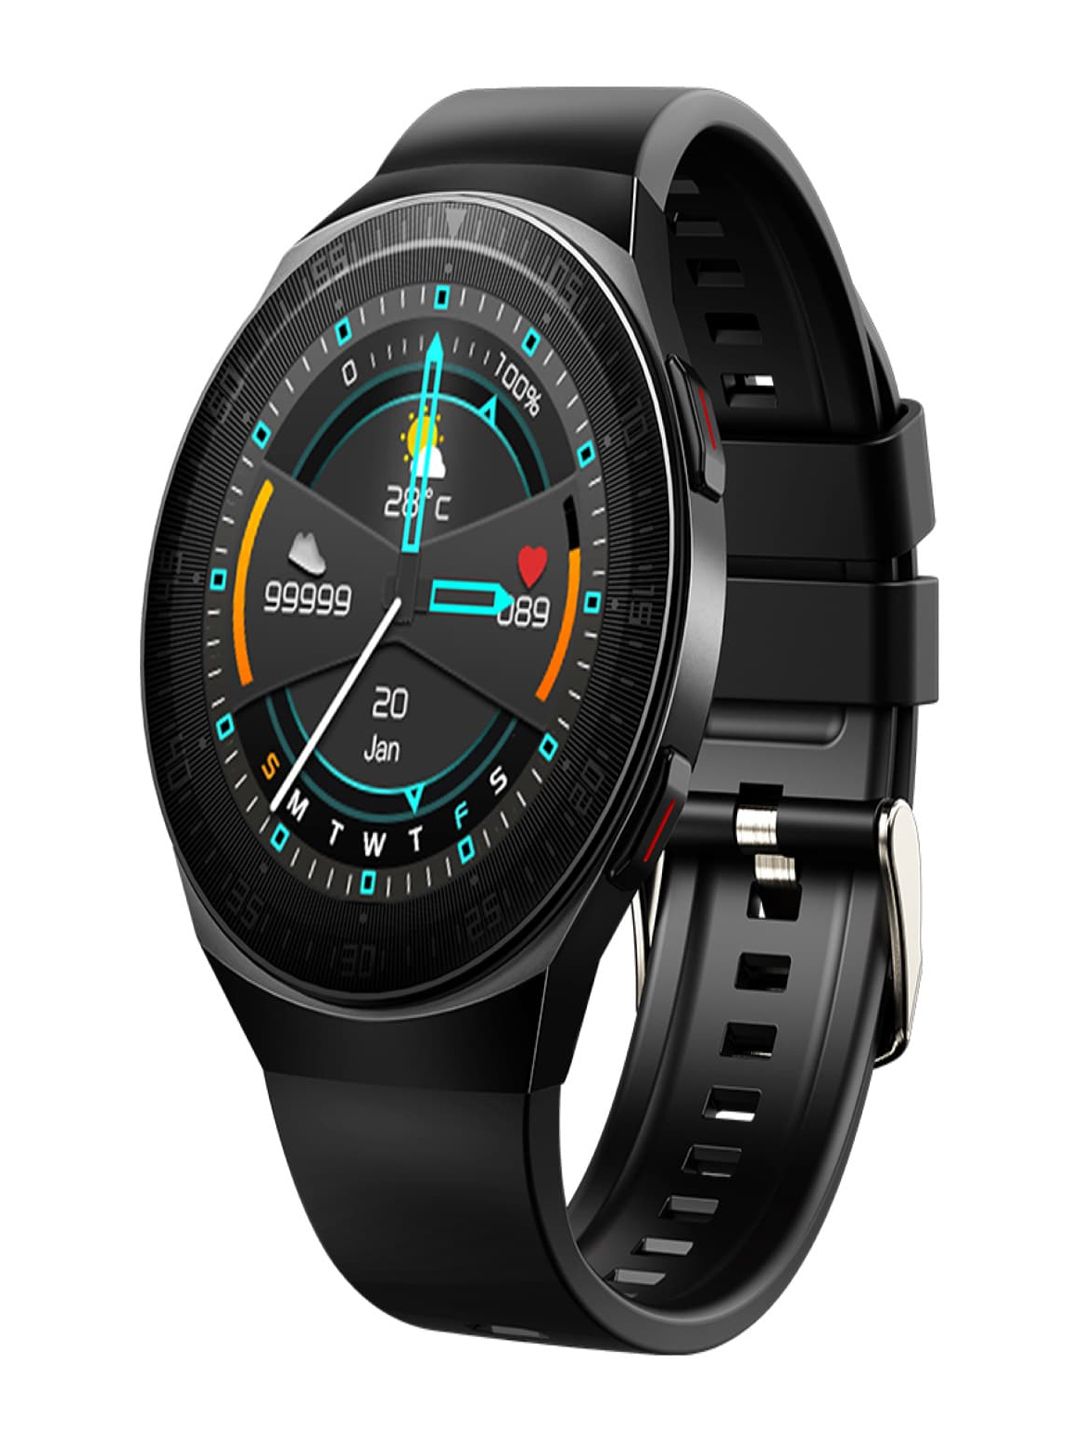 SHOPEVOLVES Black Solid NextFIT Song Full Touch Smart Watch Price in India